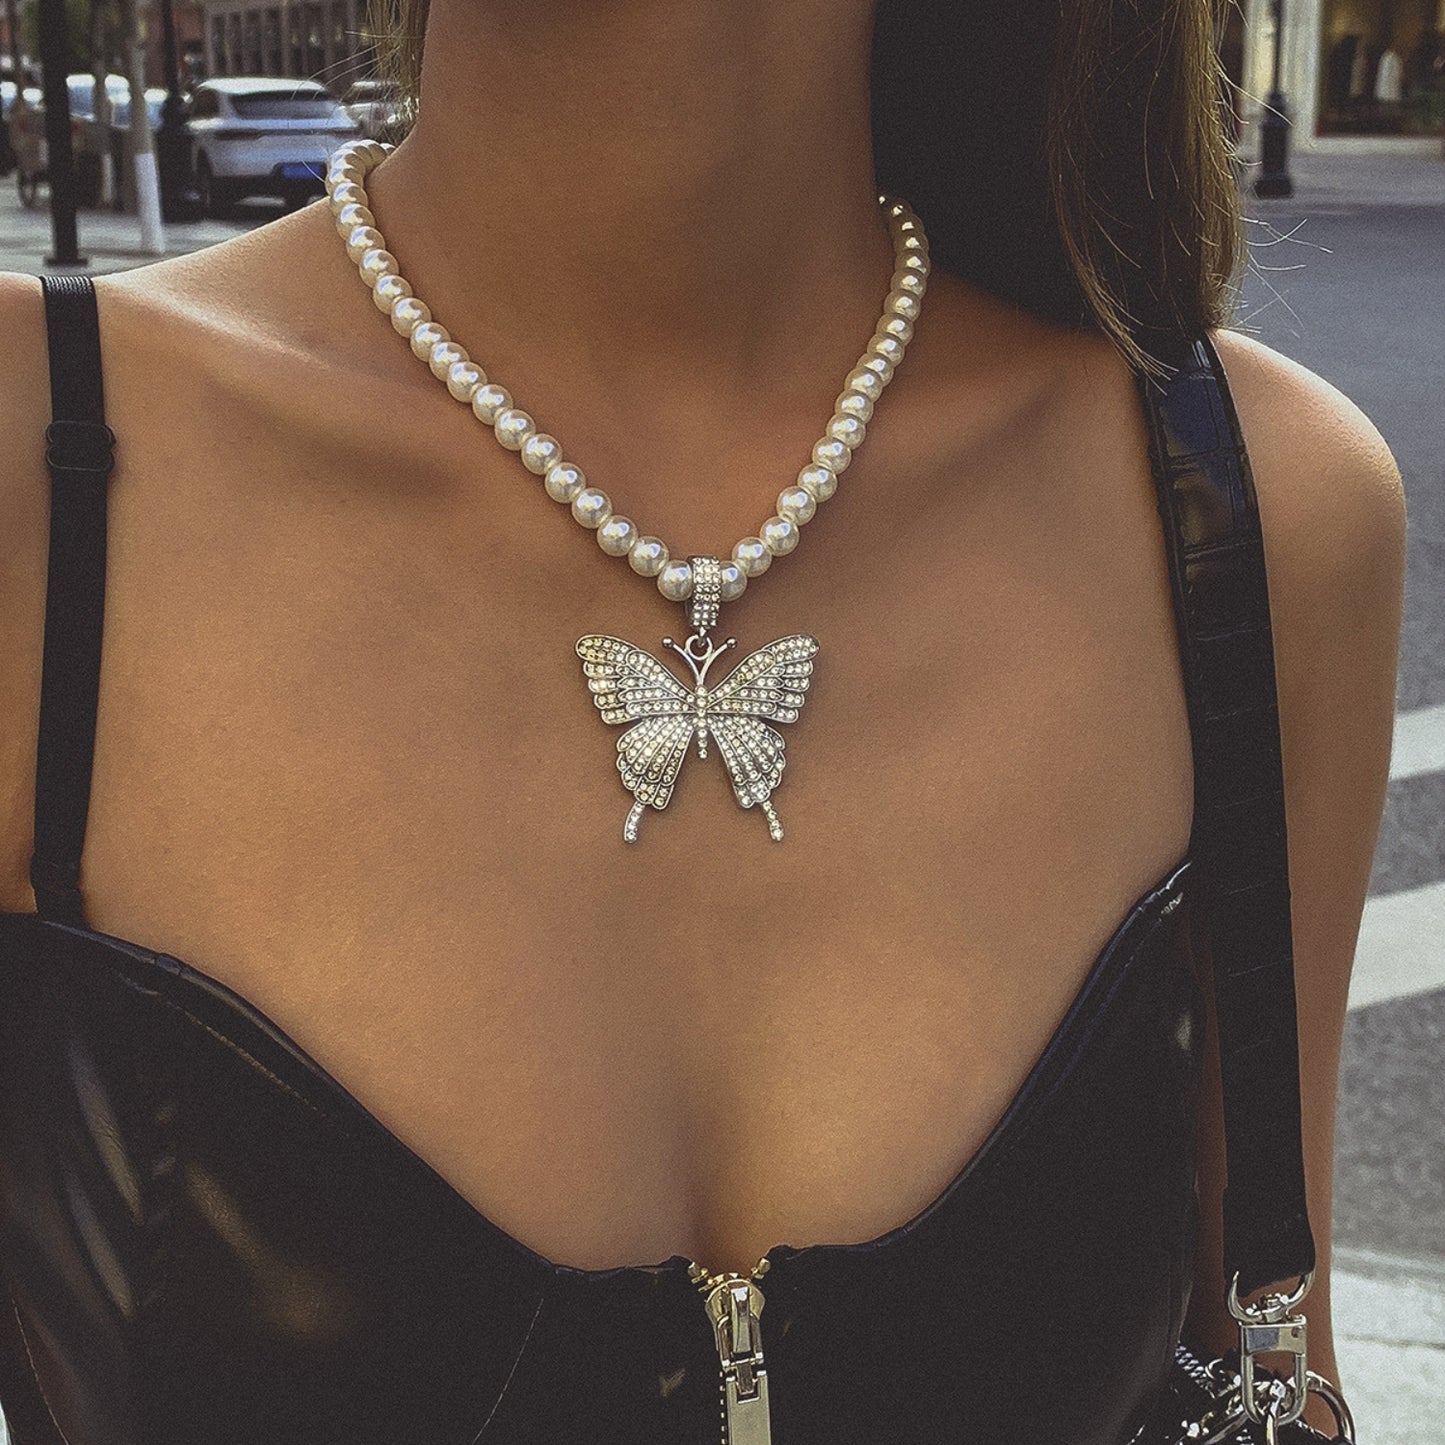 Butterfly Choker Necklace Rhinestone Pendant Necklaces Chain Sparkly Butterfly Jewerly Fashion Party Accessories for Women and Girls